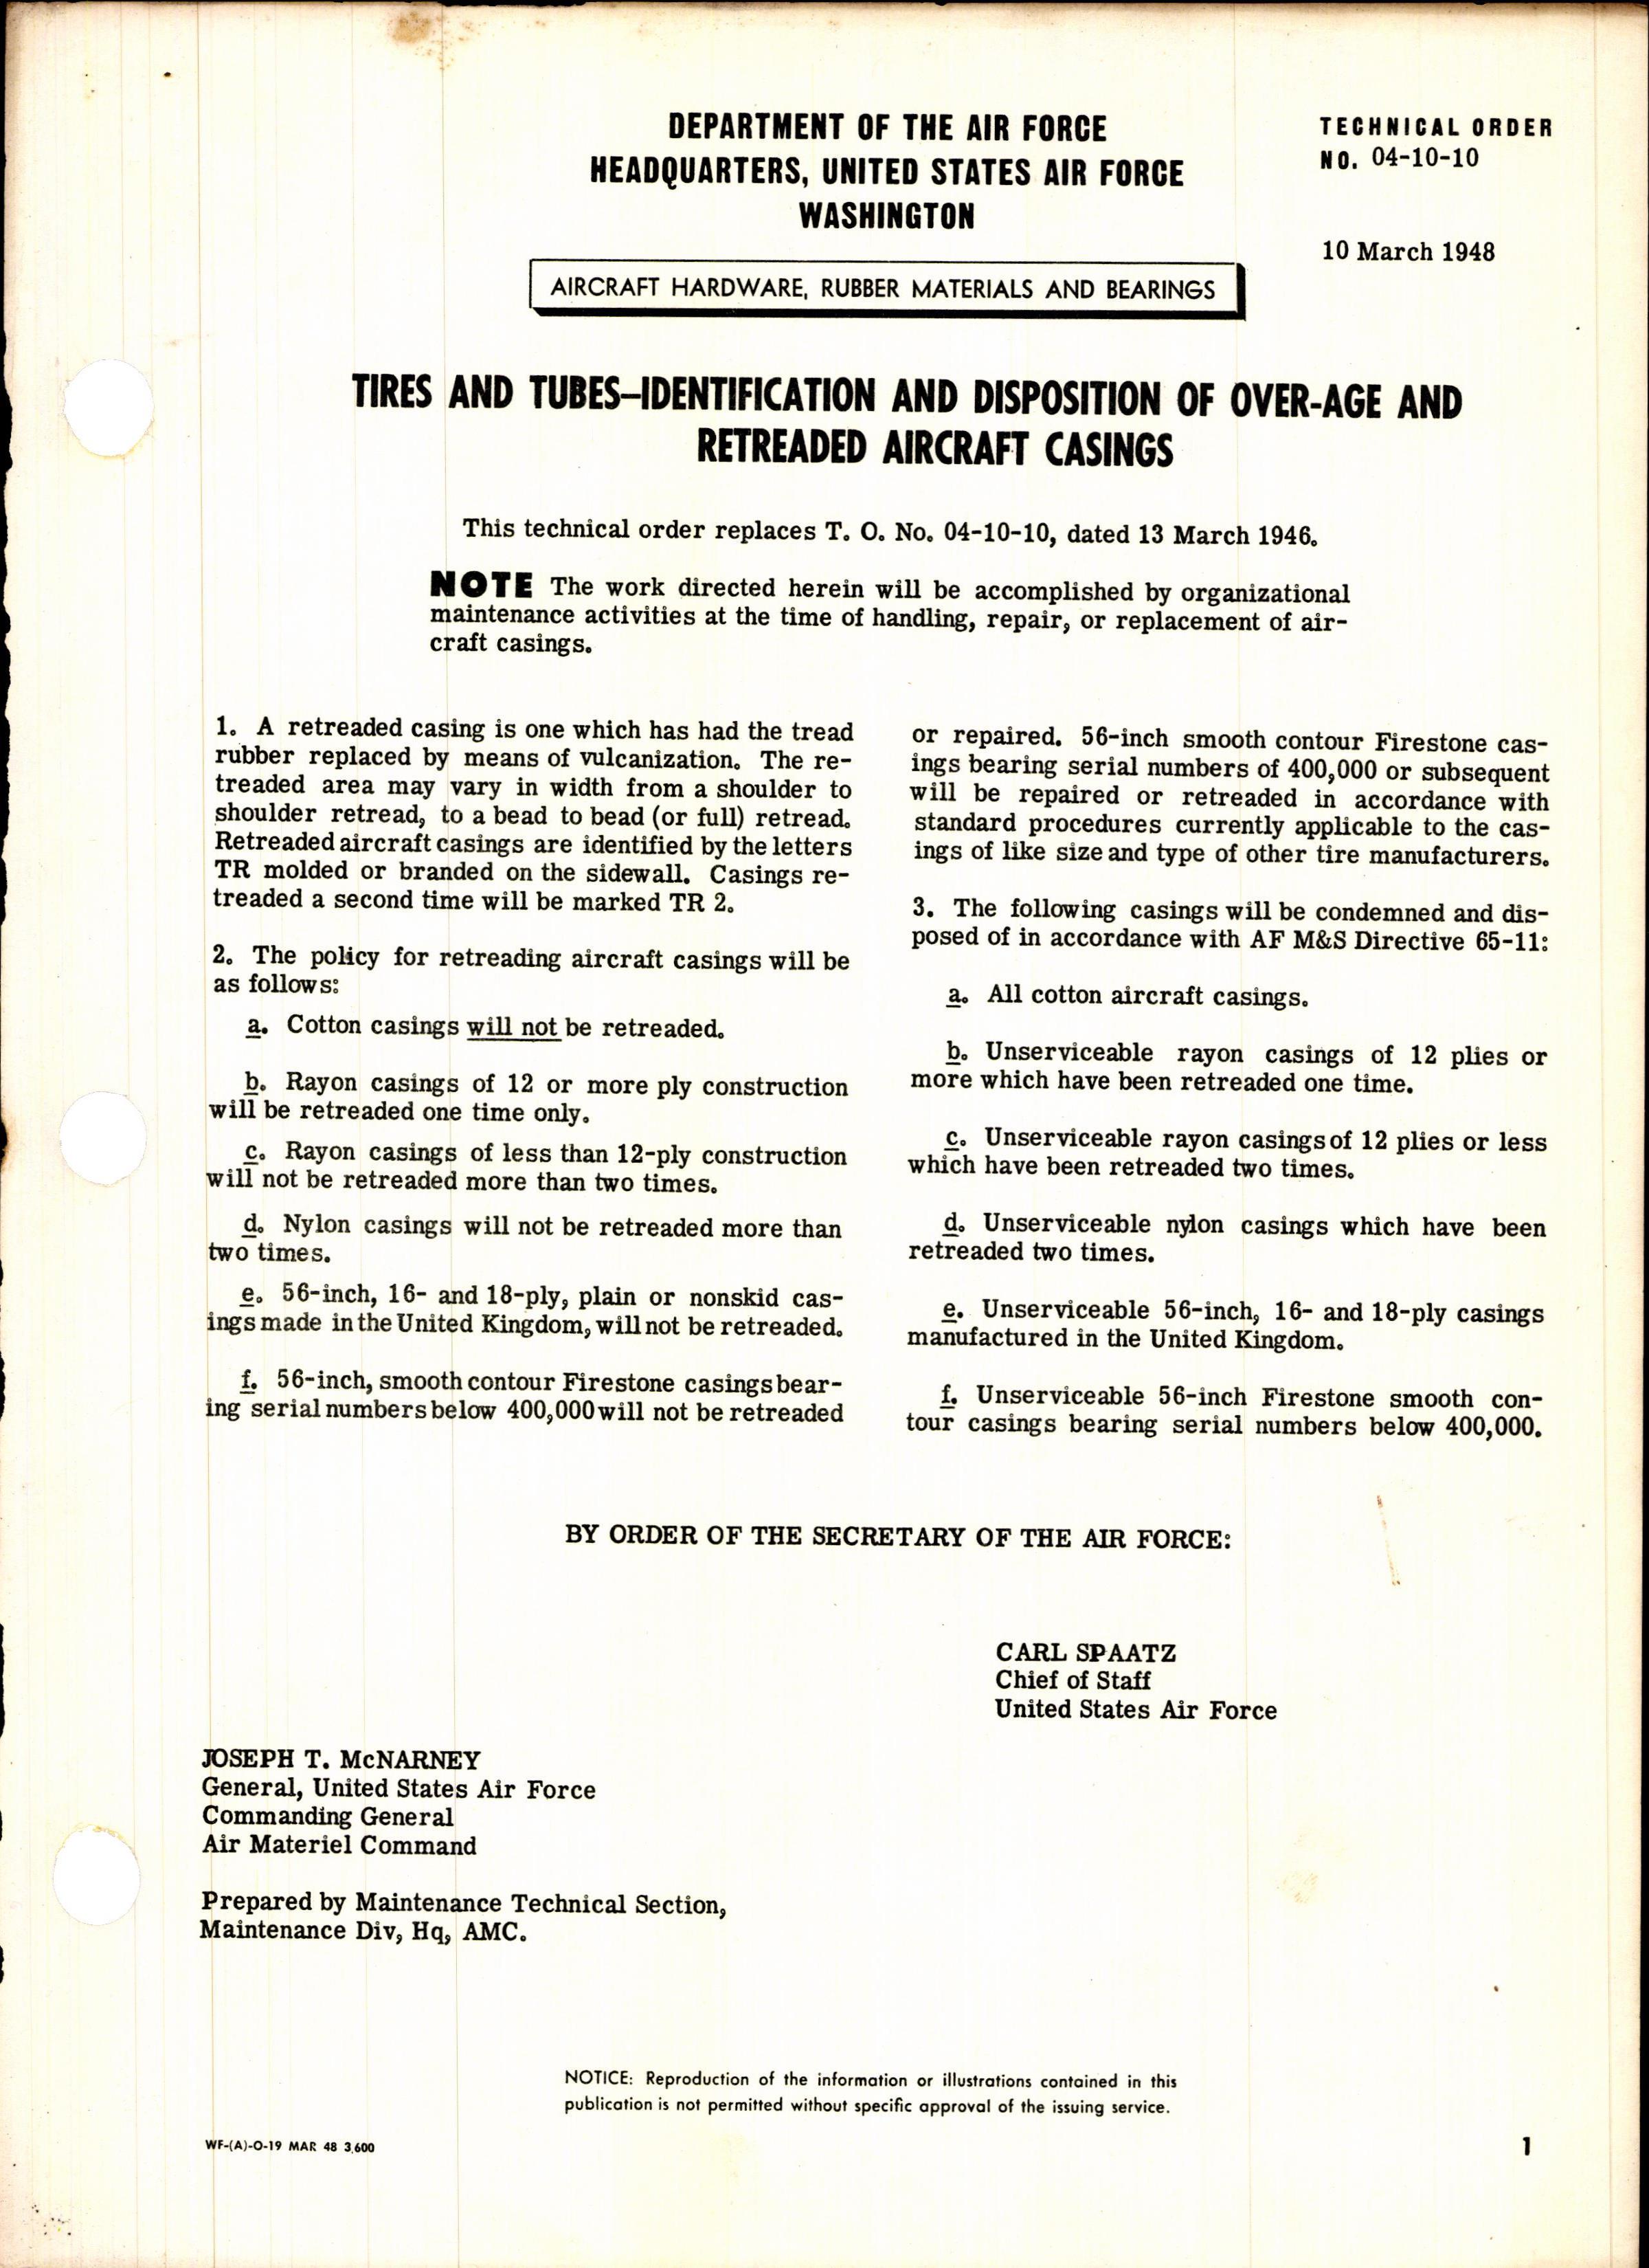 Sample page 1 from AirCorps Library document: Identification and Disposition of Over-Age and Retreaded Aircraft Casings